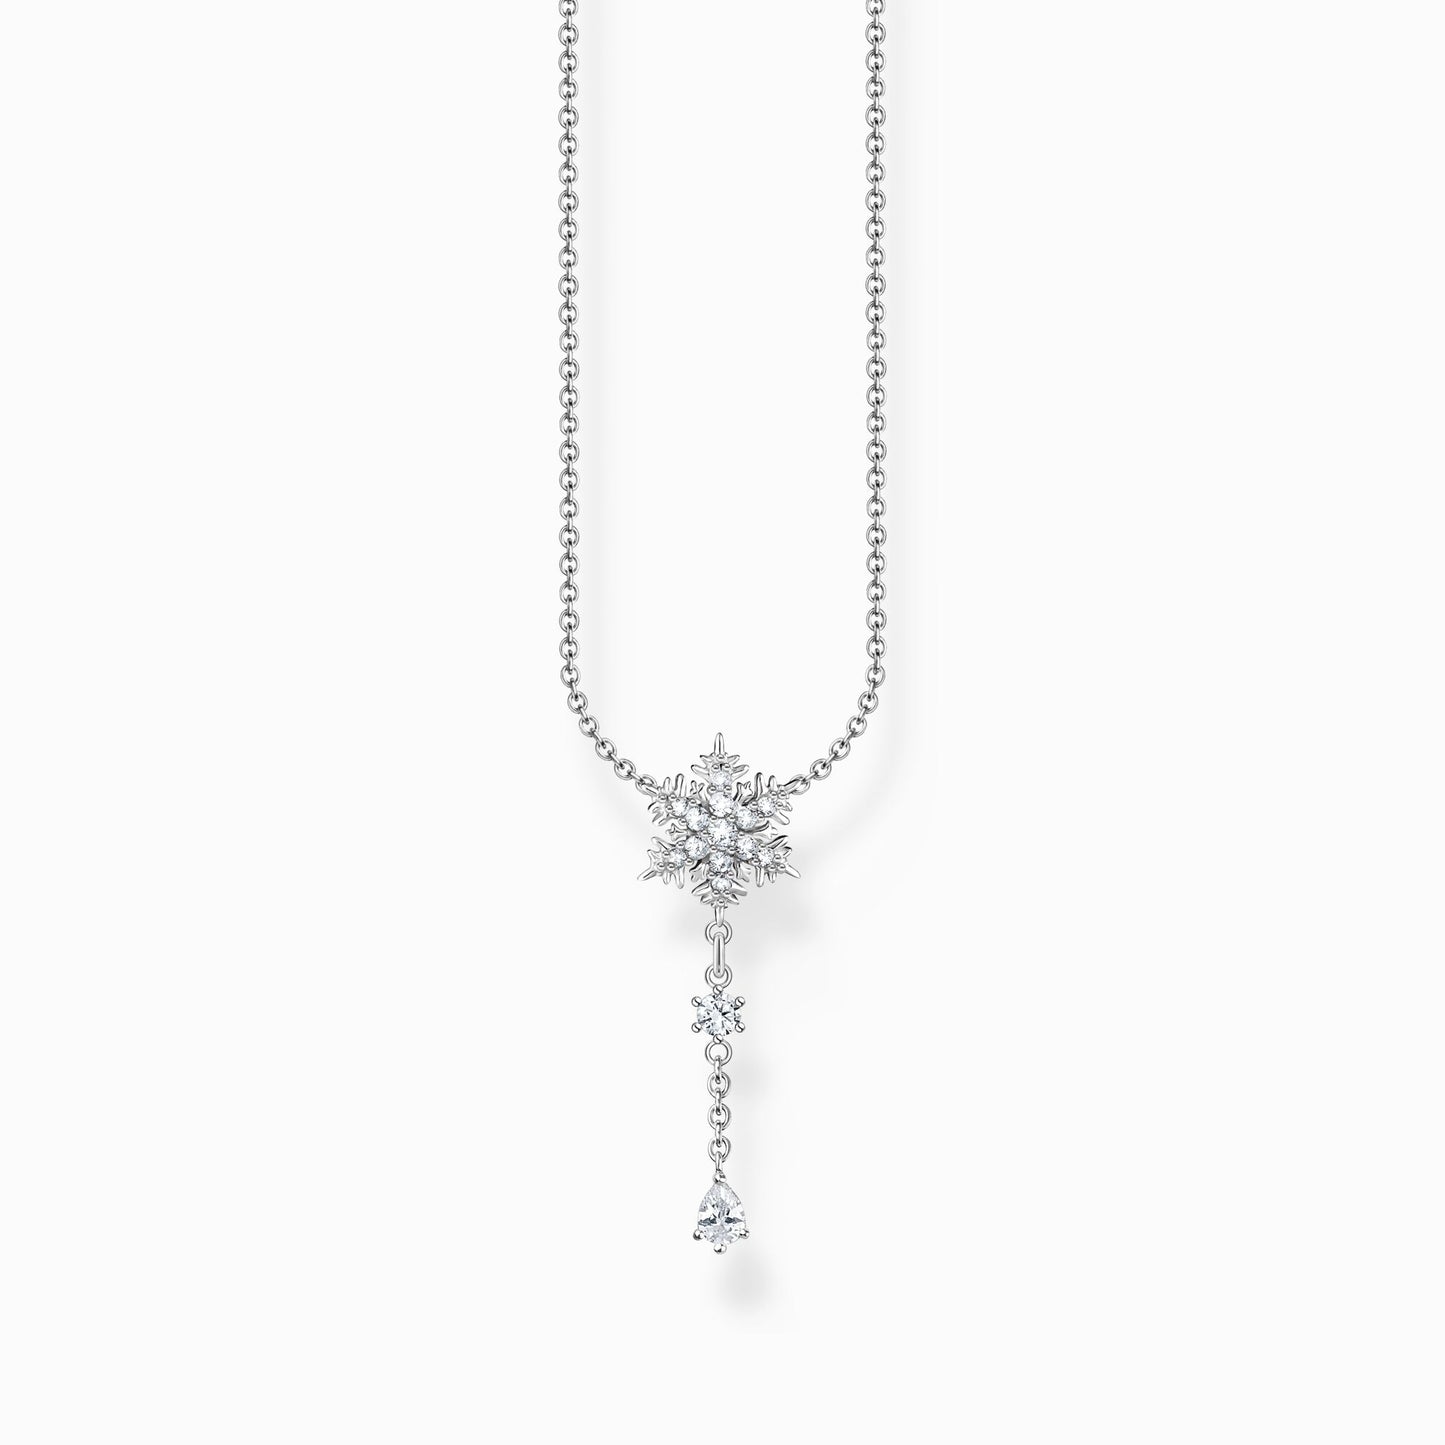 Necklace snowflake with white stones silver KE2171-051-14-L45V